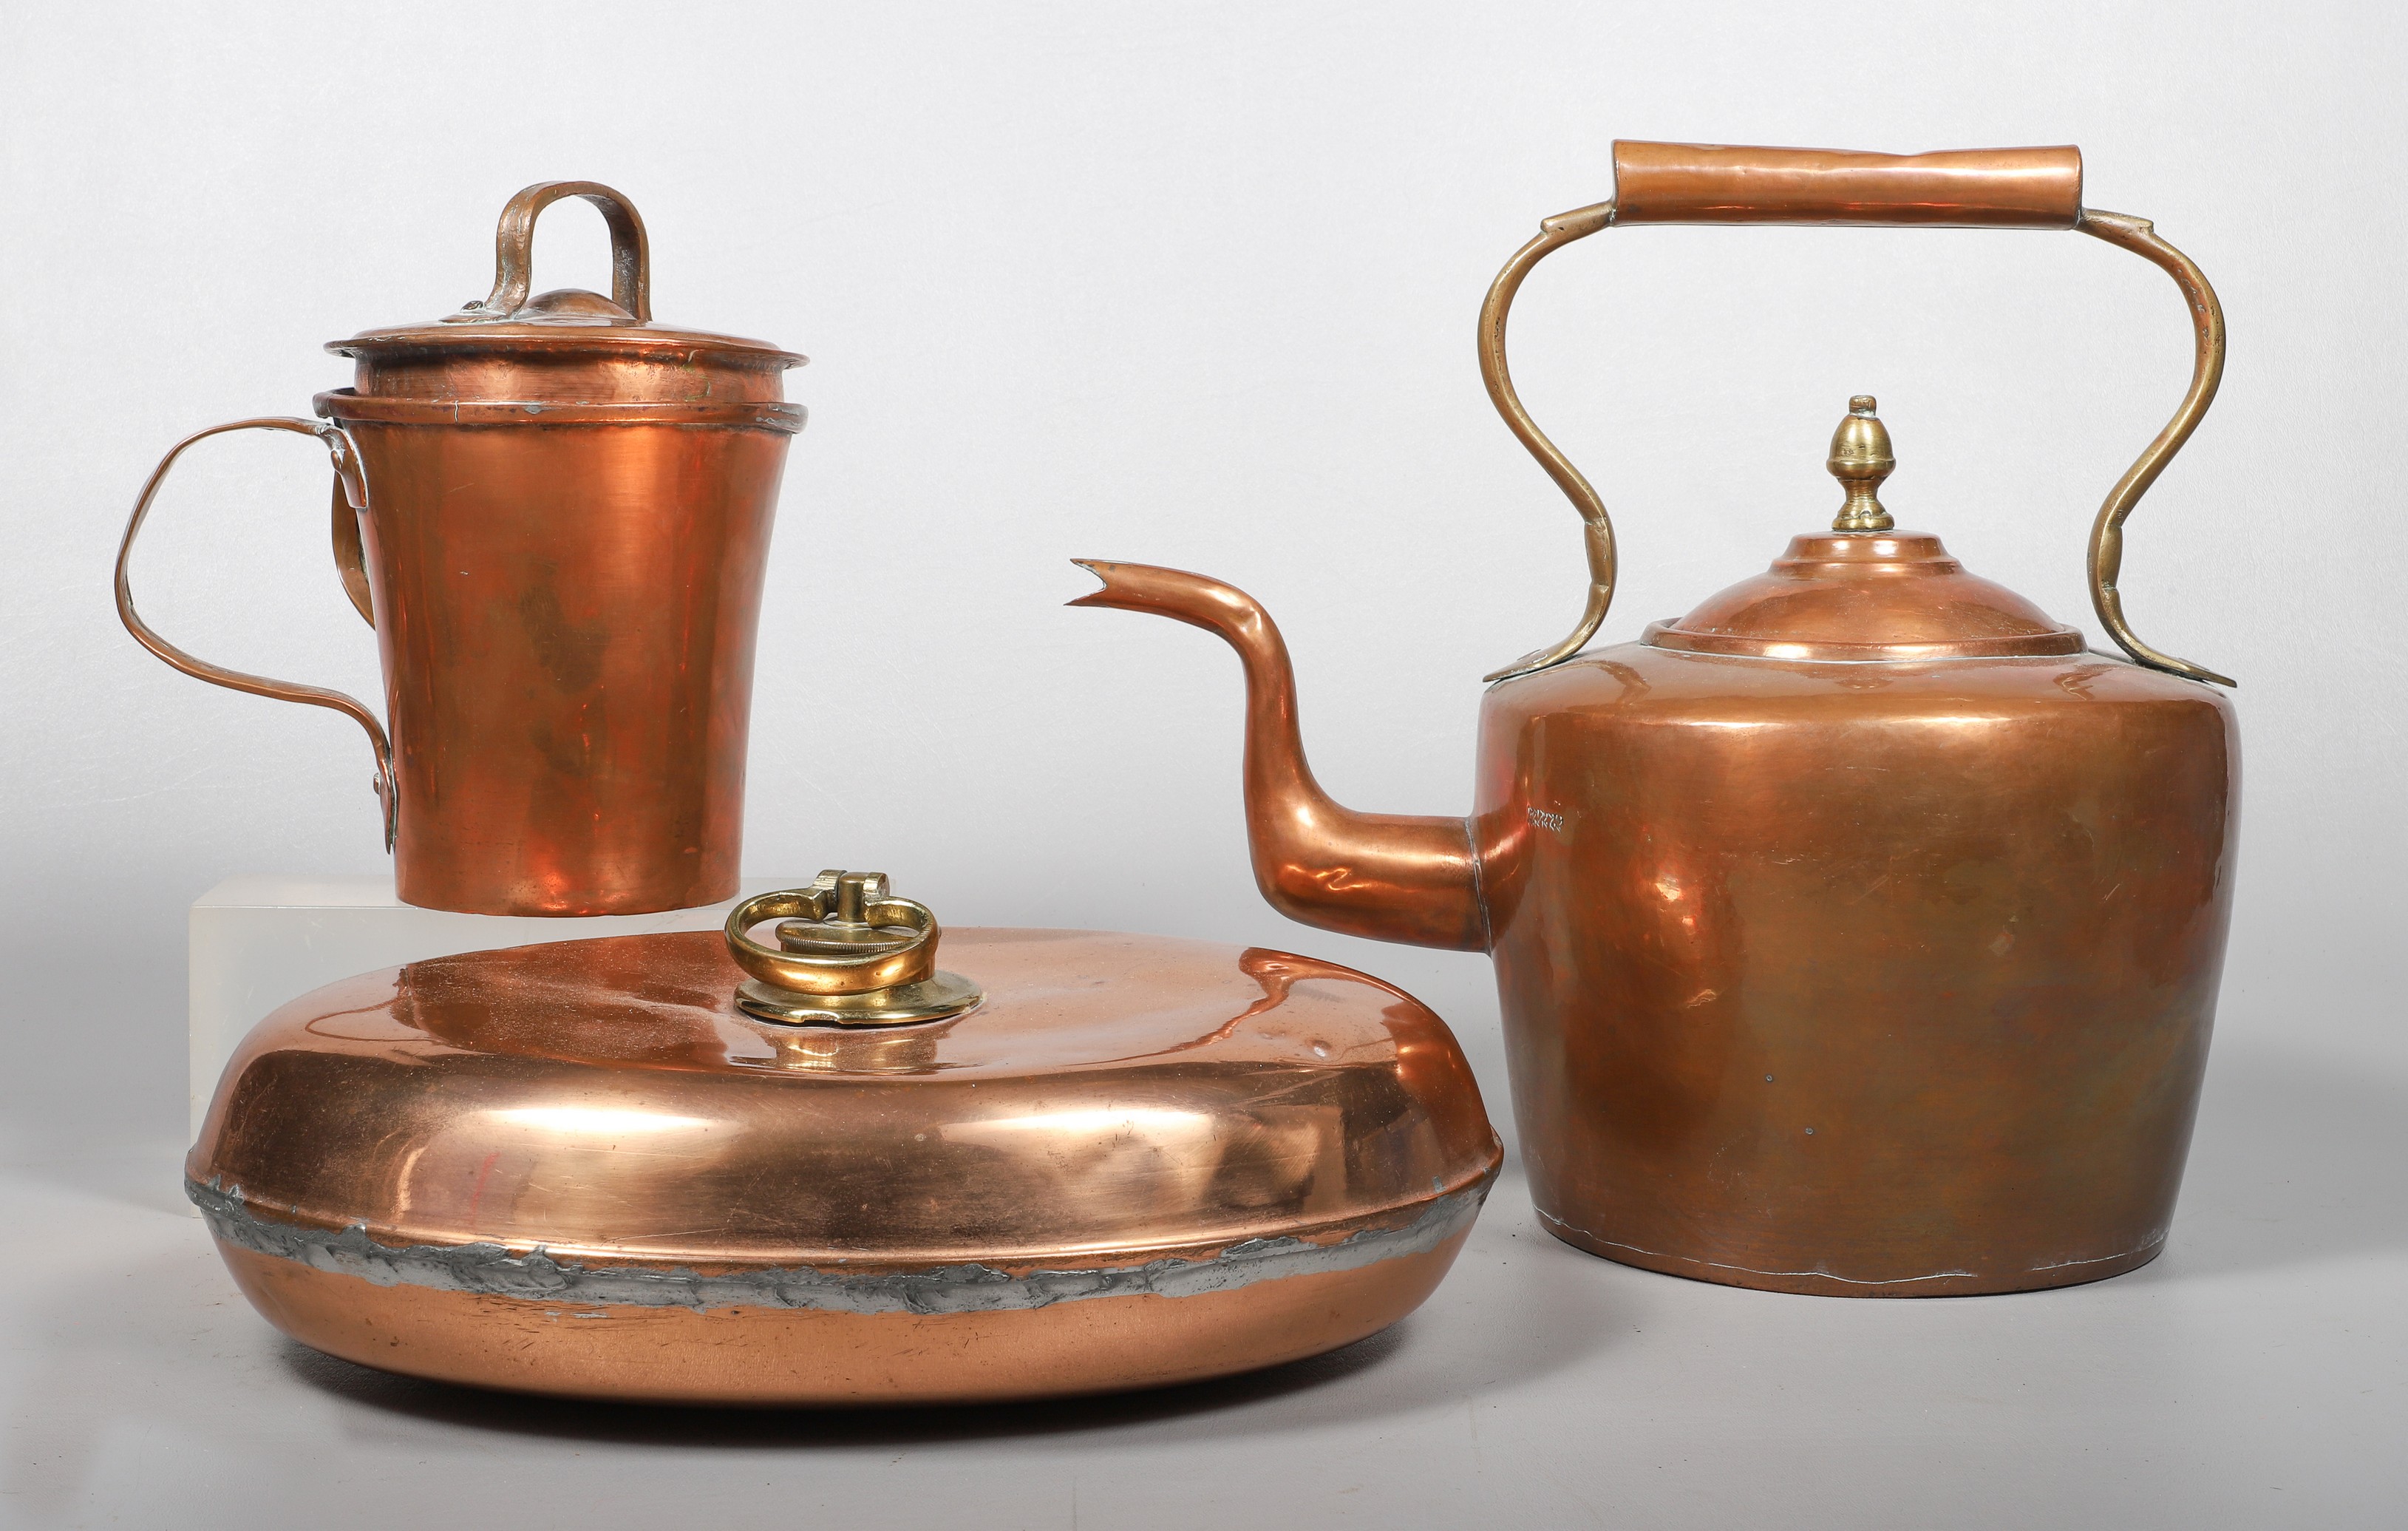  3 Copper kettle mug and bed 3b623f